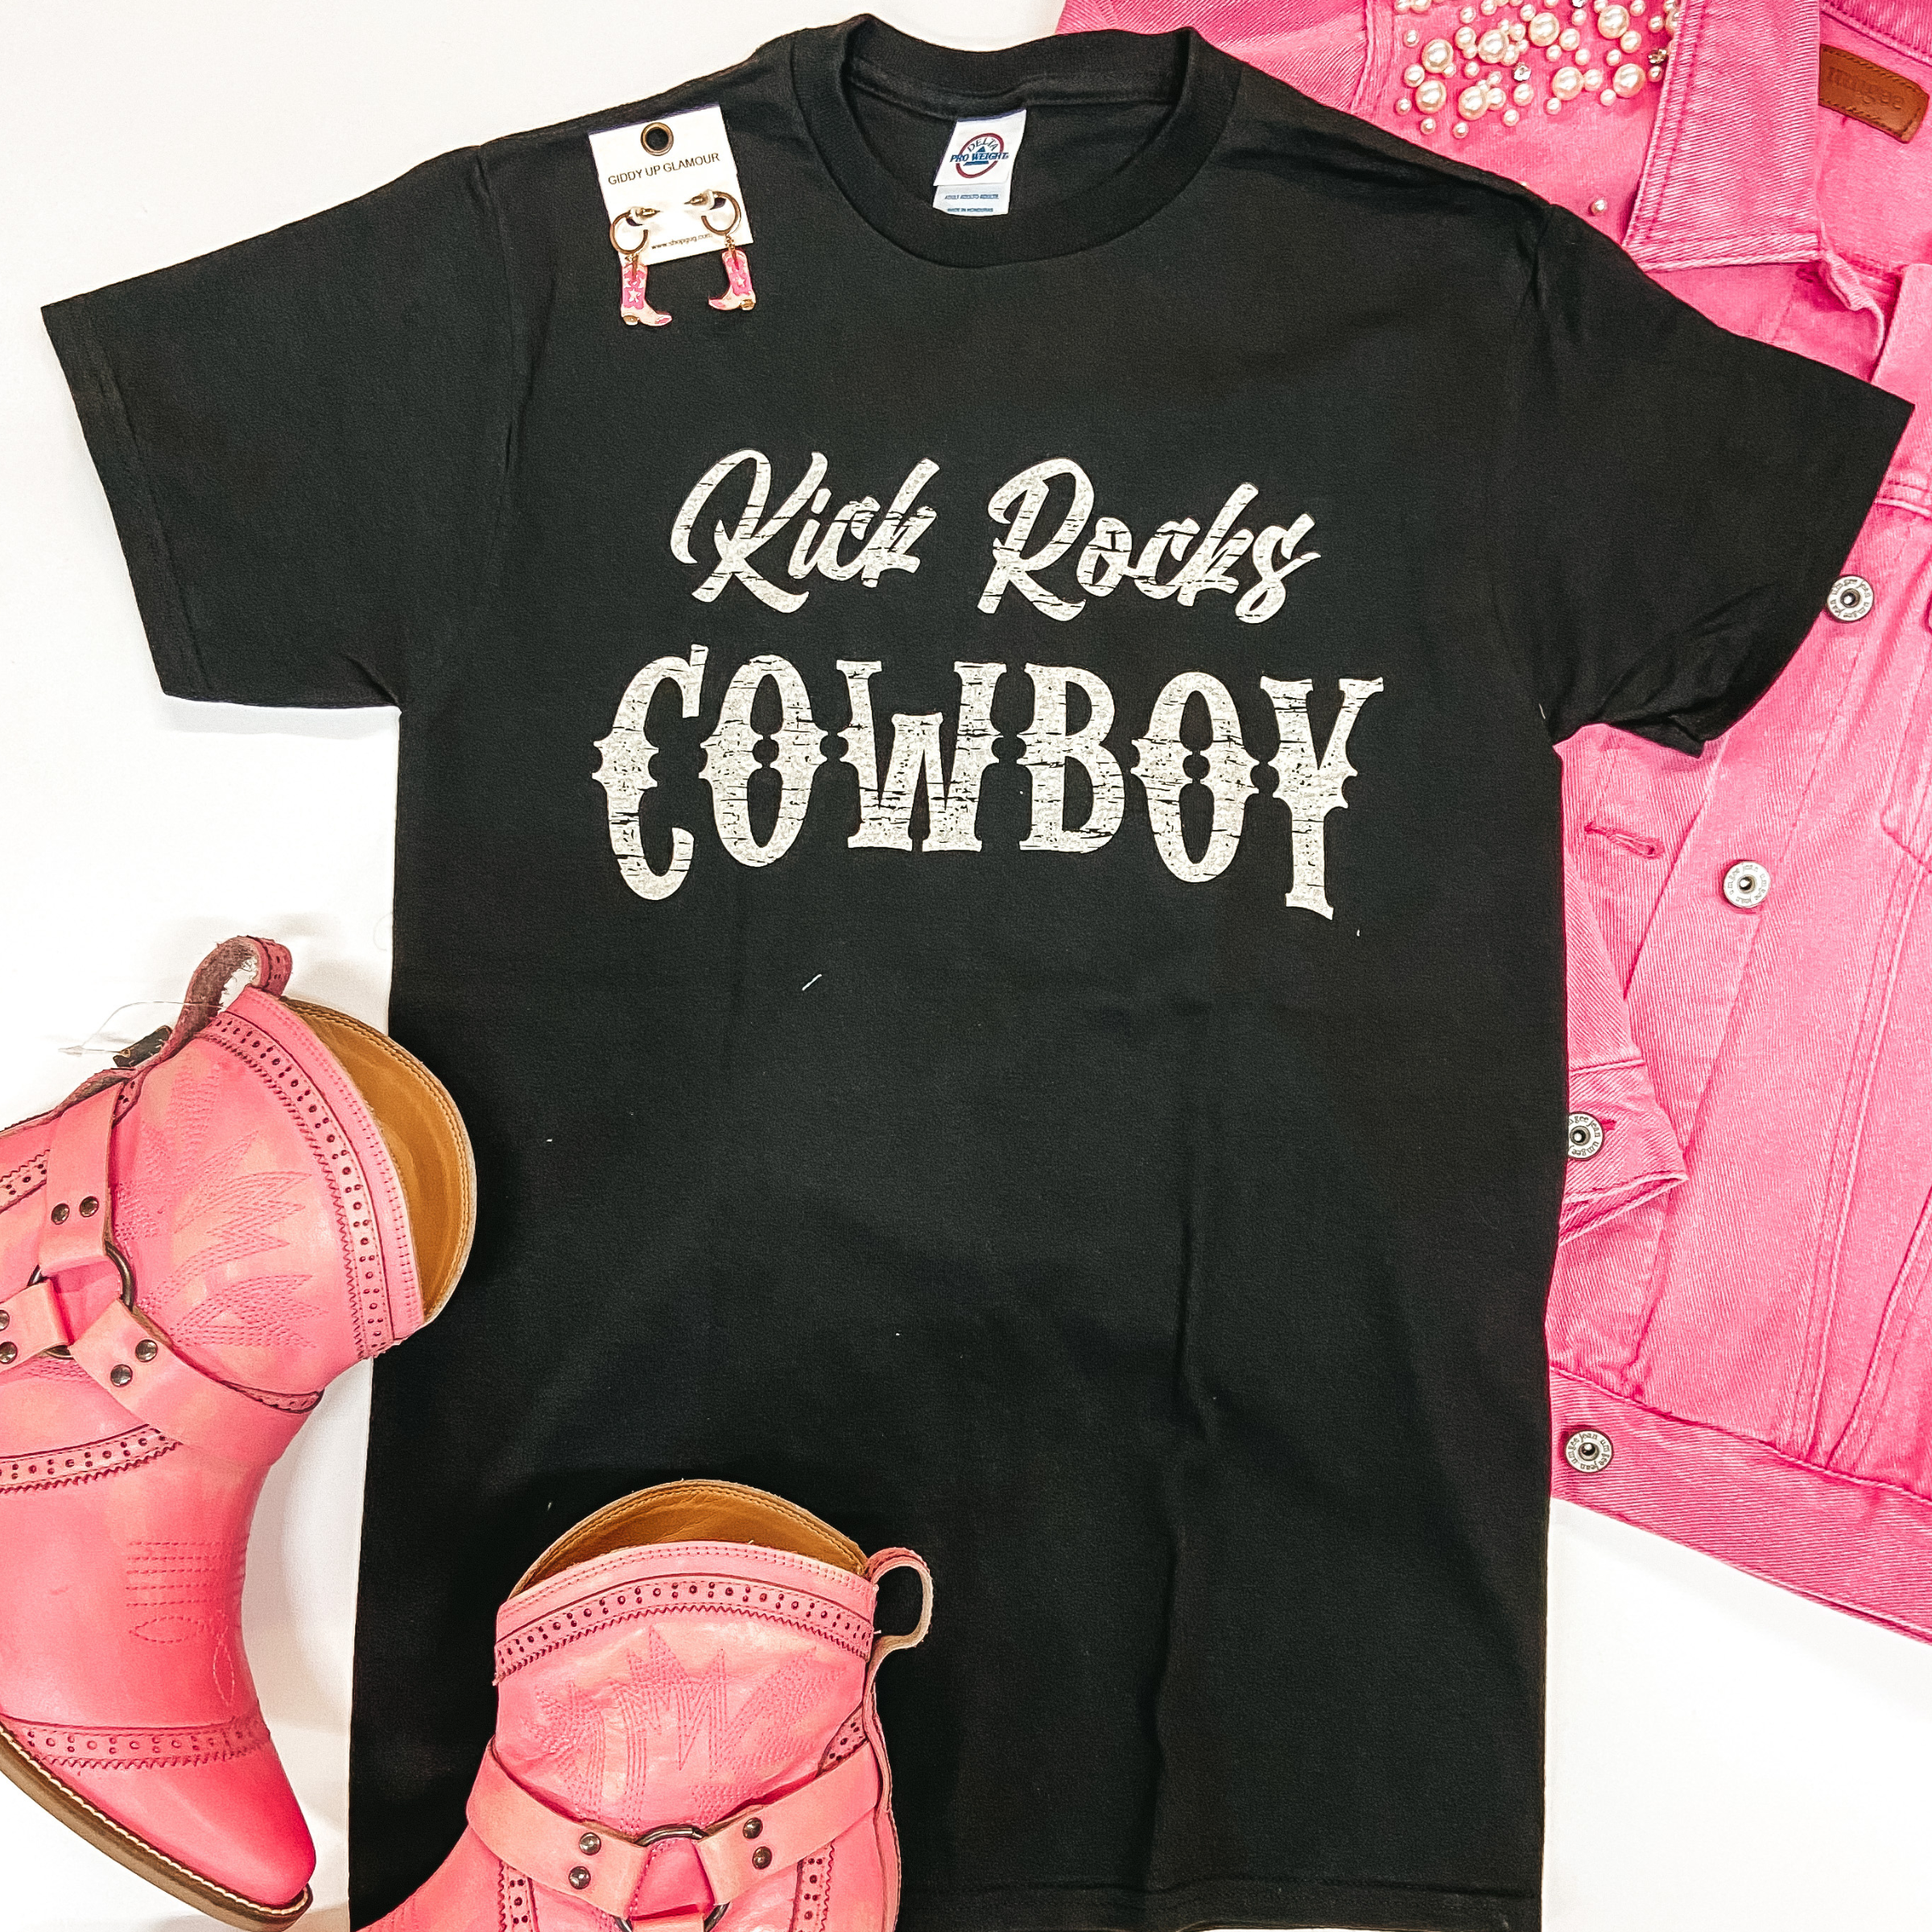 Kick Rocks Cowboy Short Sleeve Graphic Tee in Black - Giddy Up Glamour Boutique